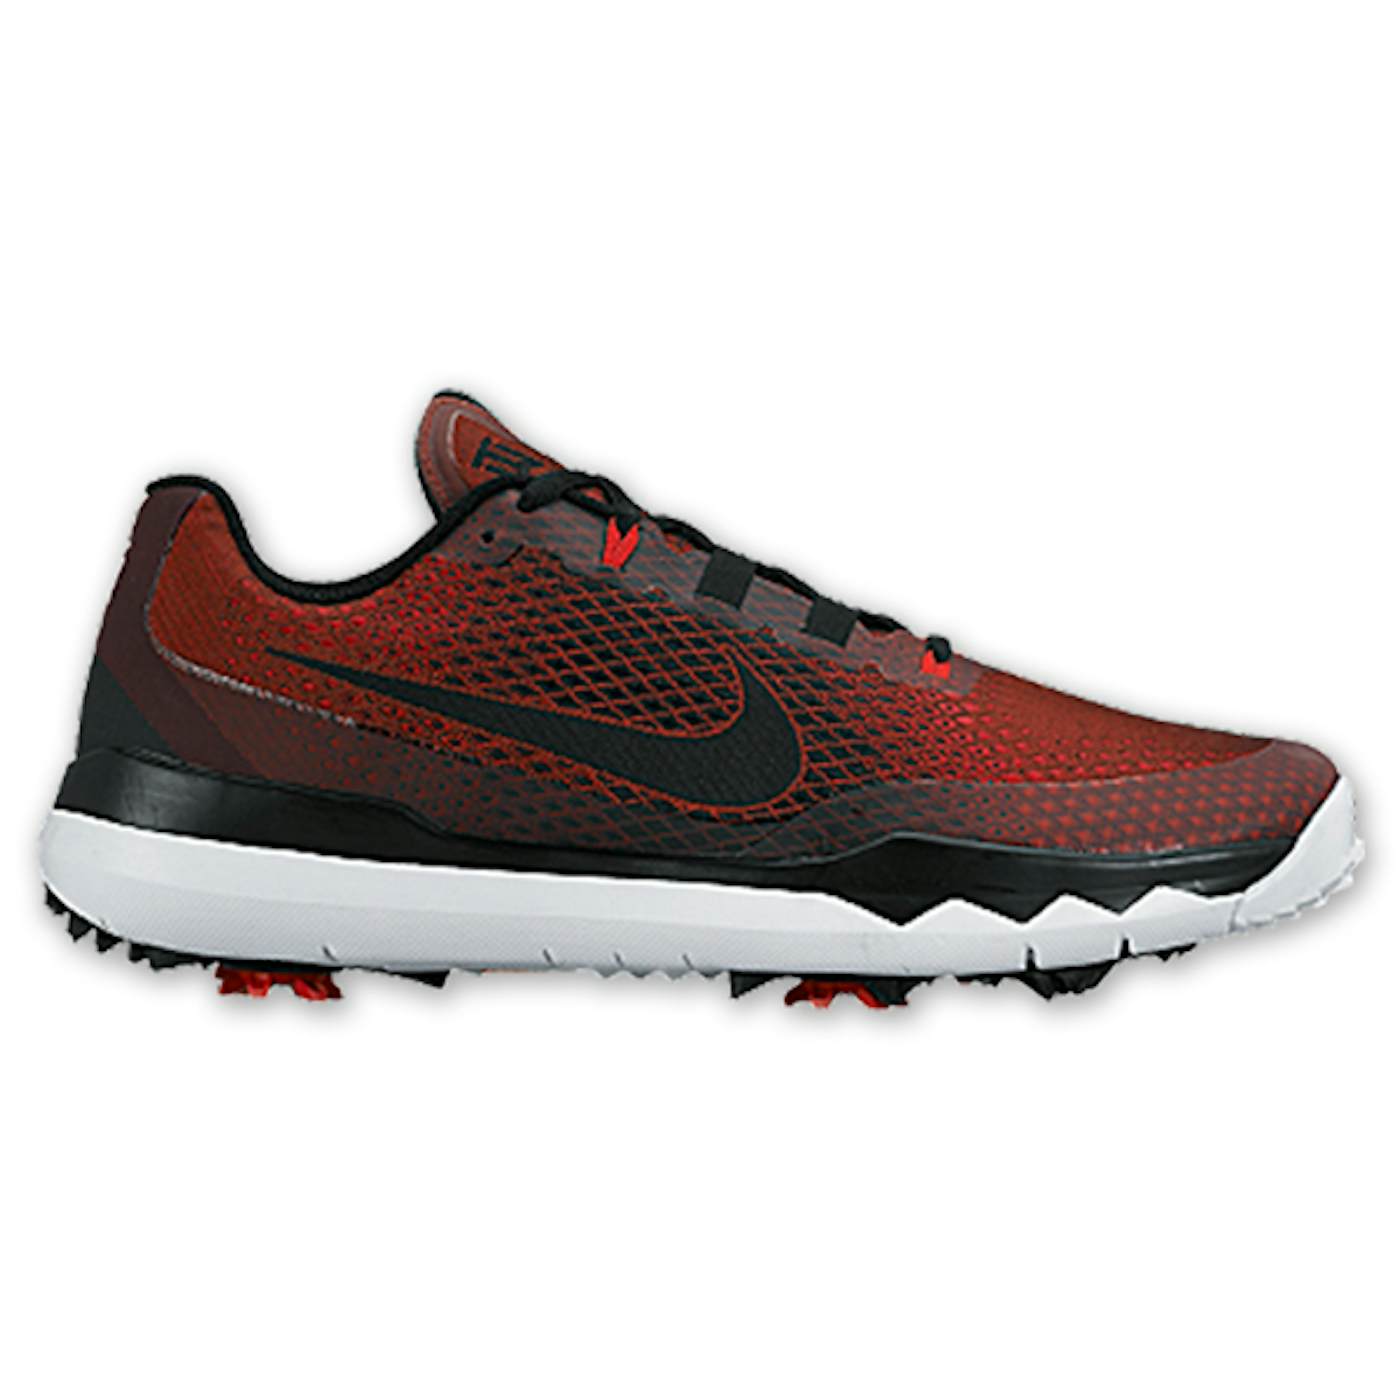 Tiger Woods 2015 Nike Golf Shoes: Red